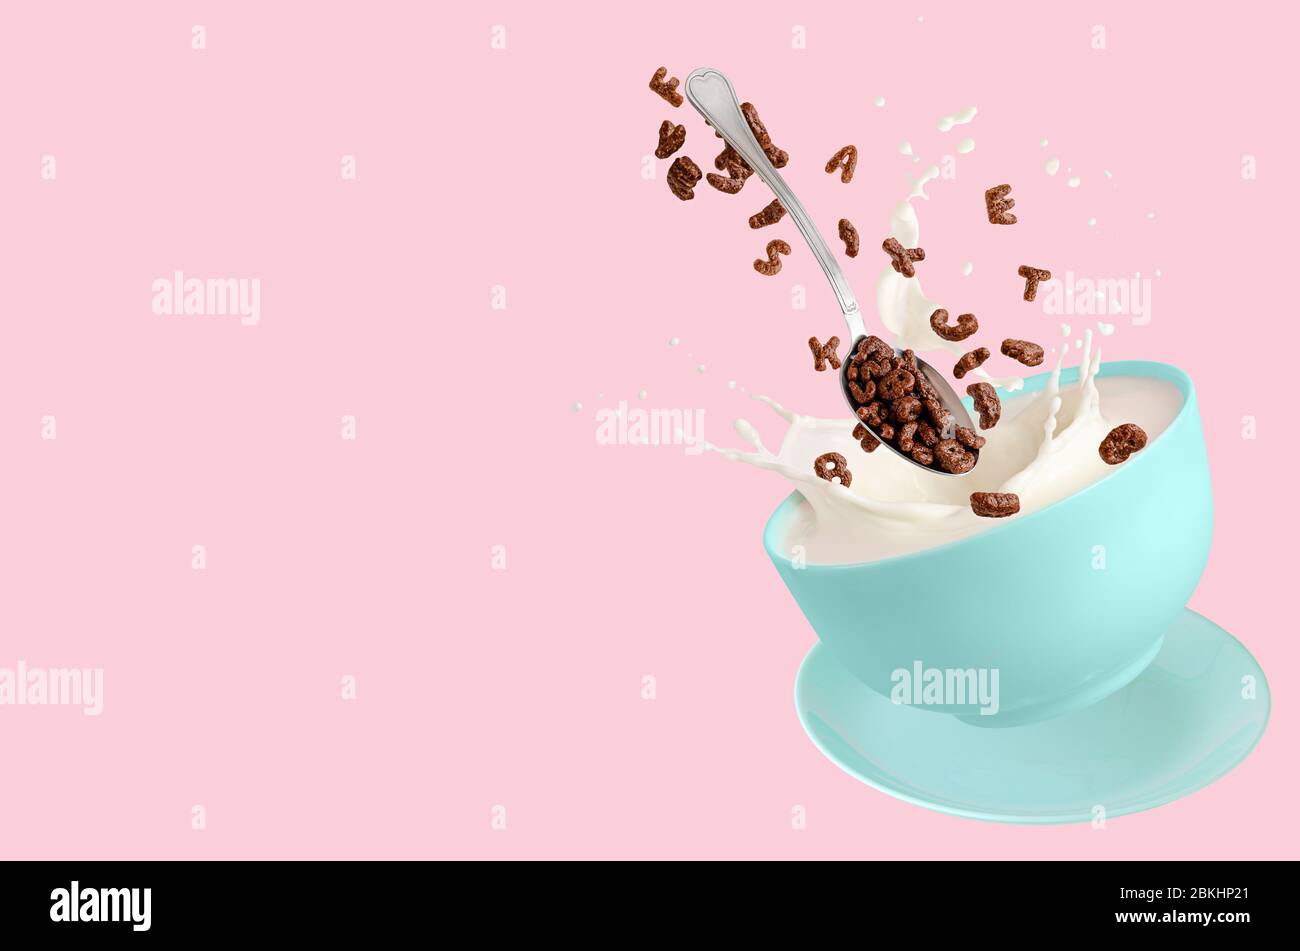 Cereal cocoa letters falling into blue bowl with splashing milk on pink background. Dry breakfast for children. Copy space. Stock Photo